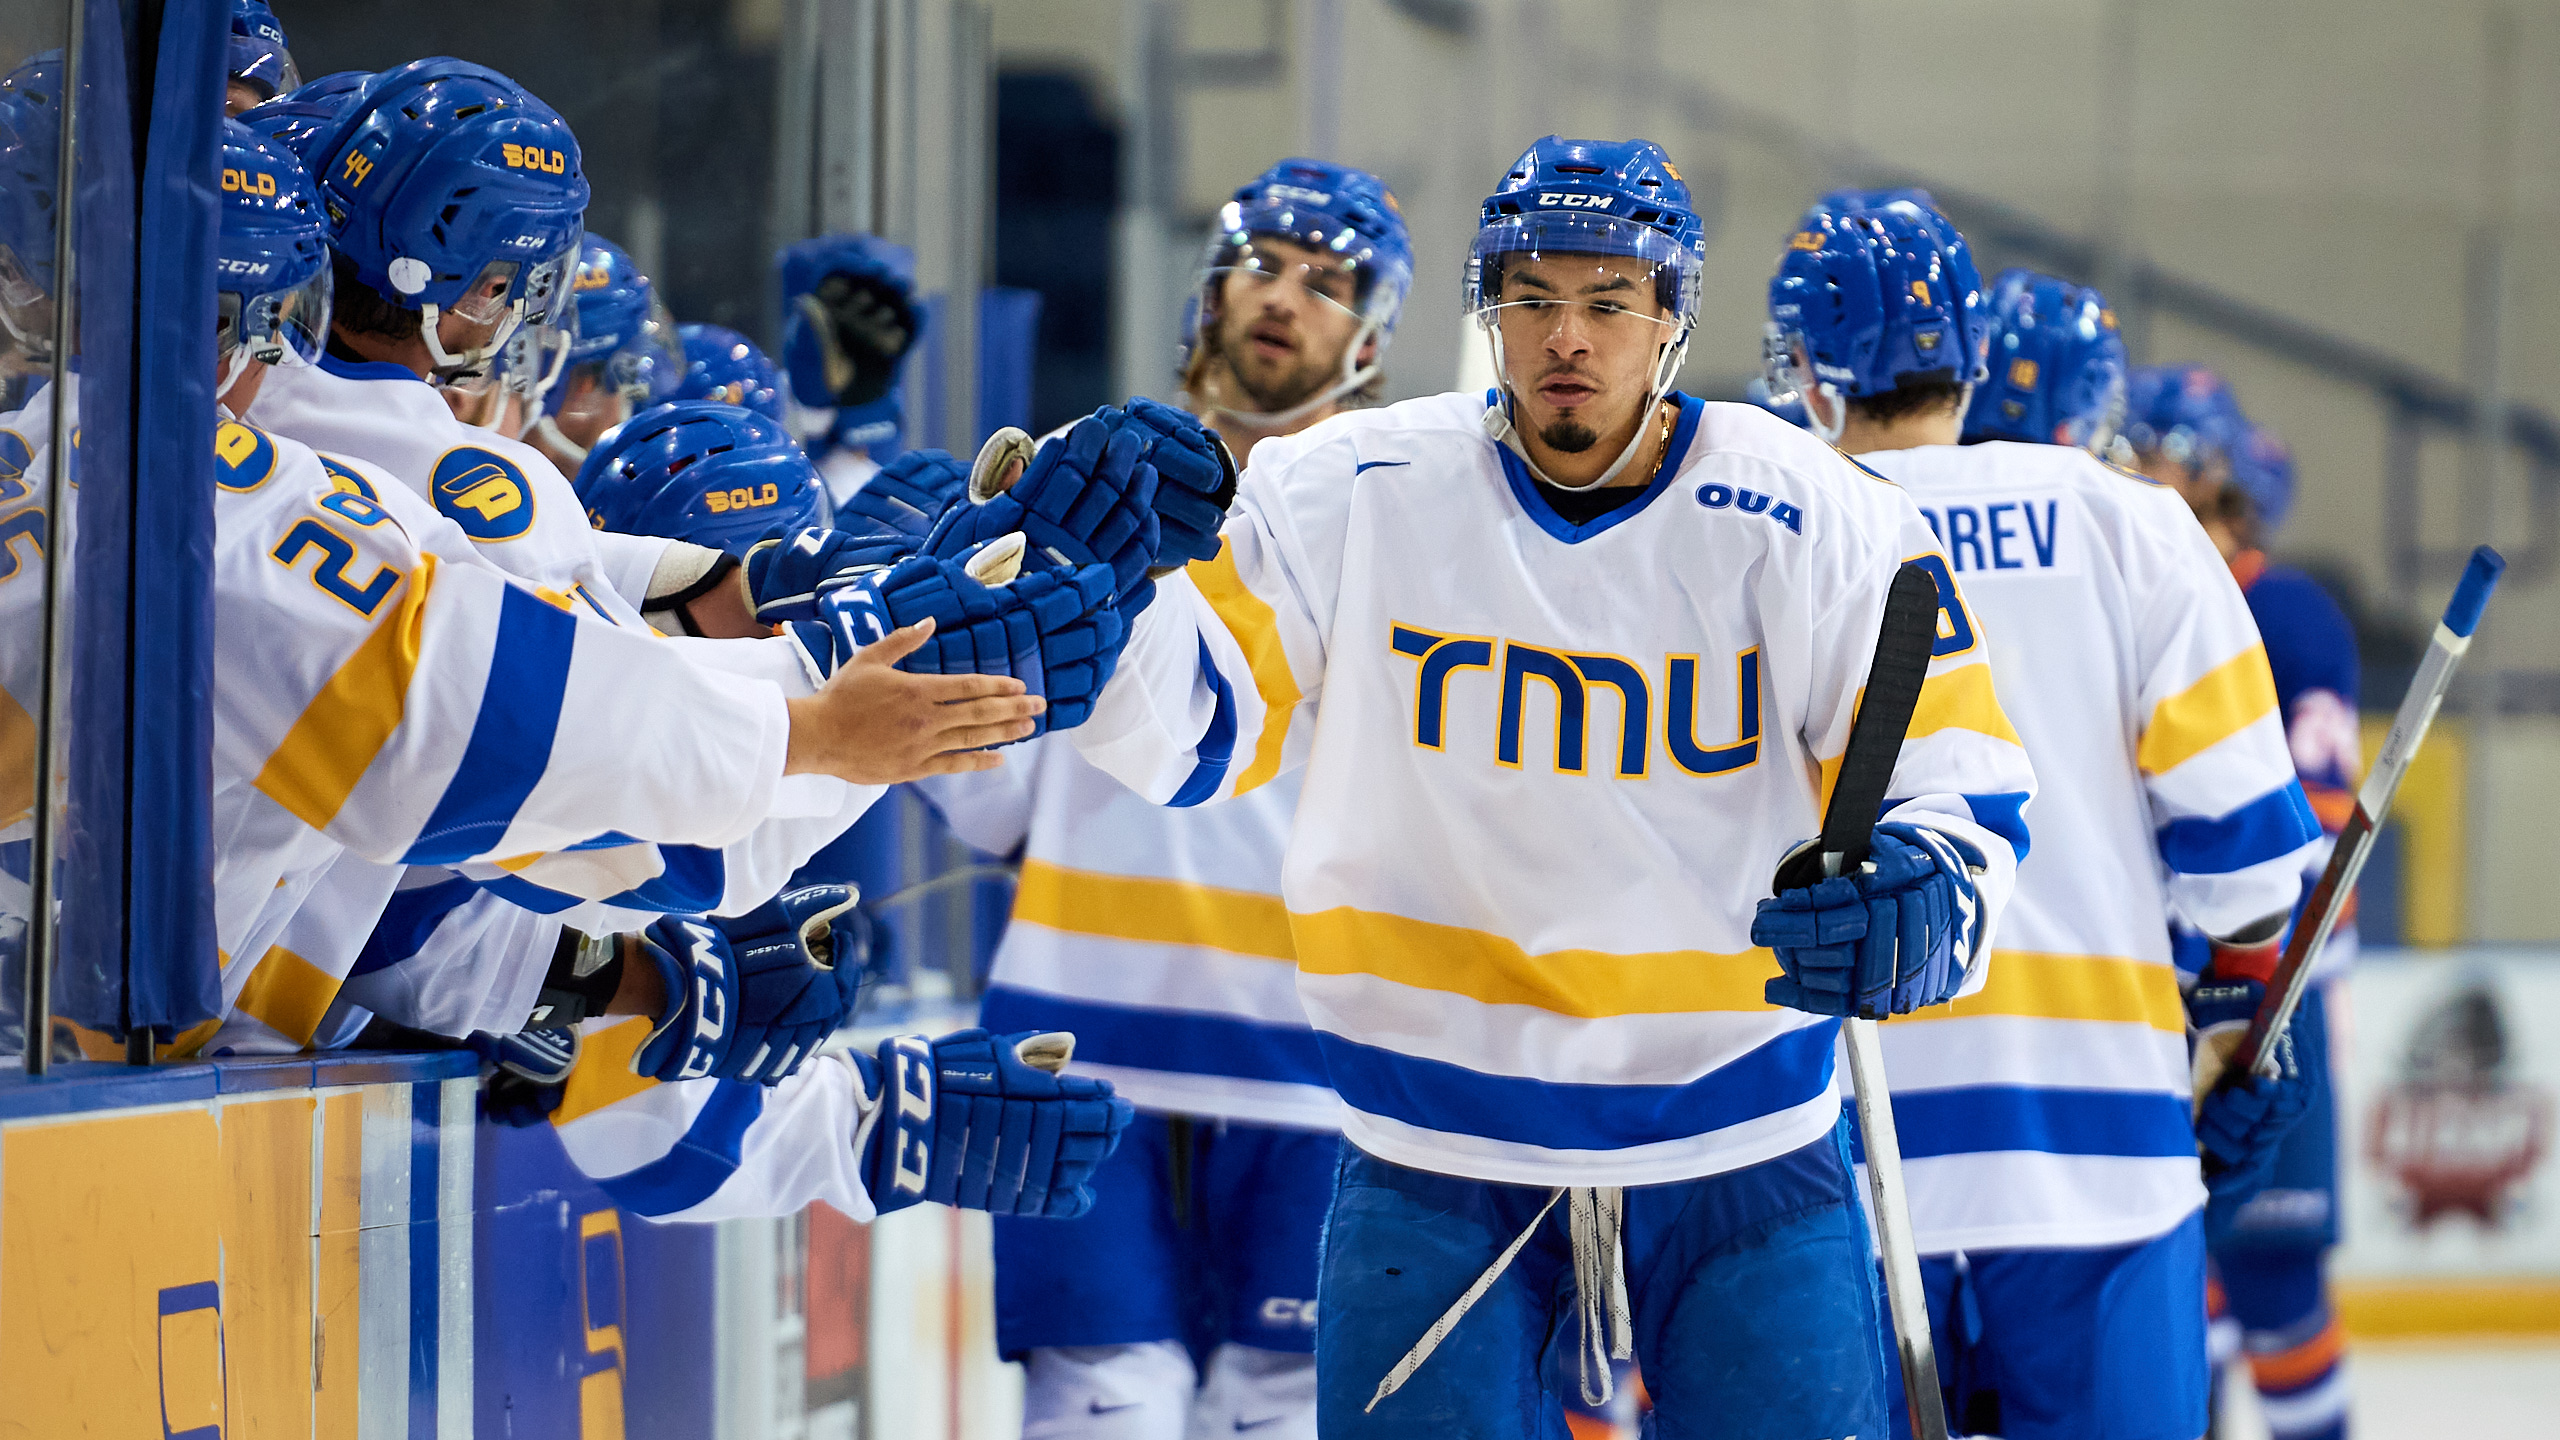 TMU Bold men's hockey player Kyle Bollers high-fives the bench